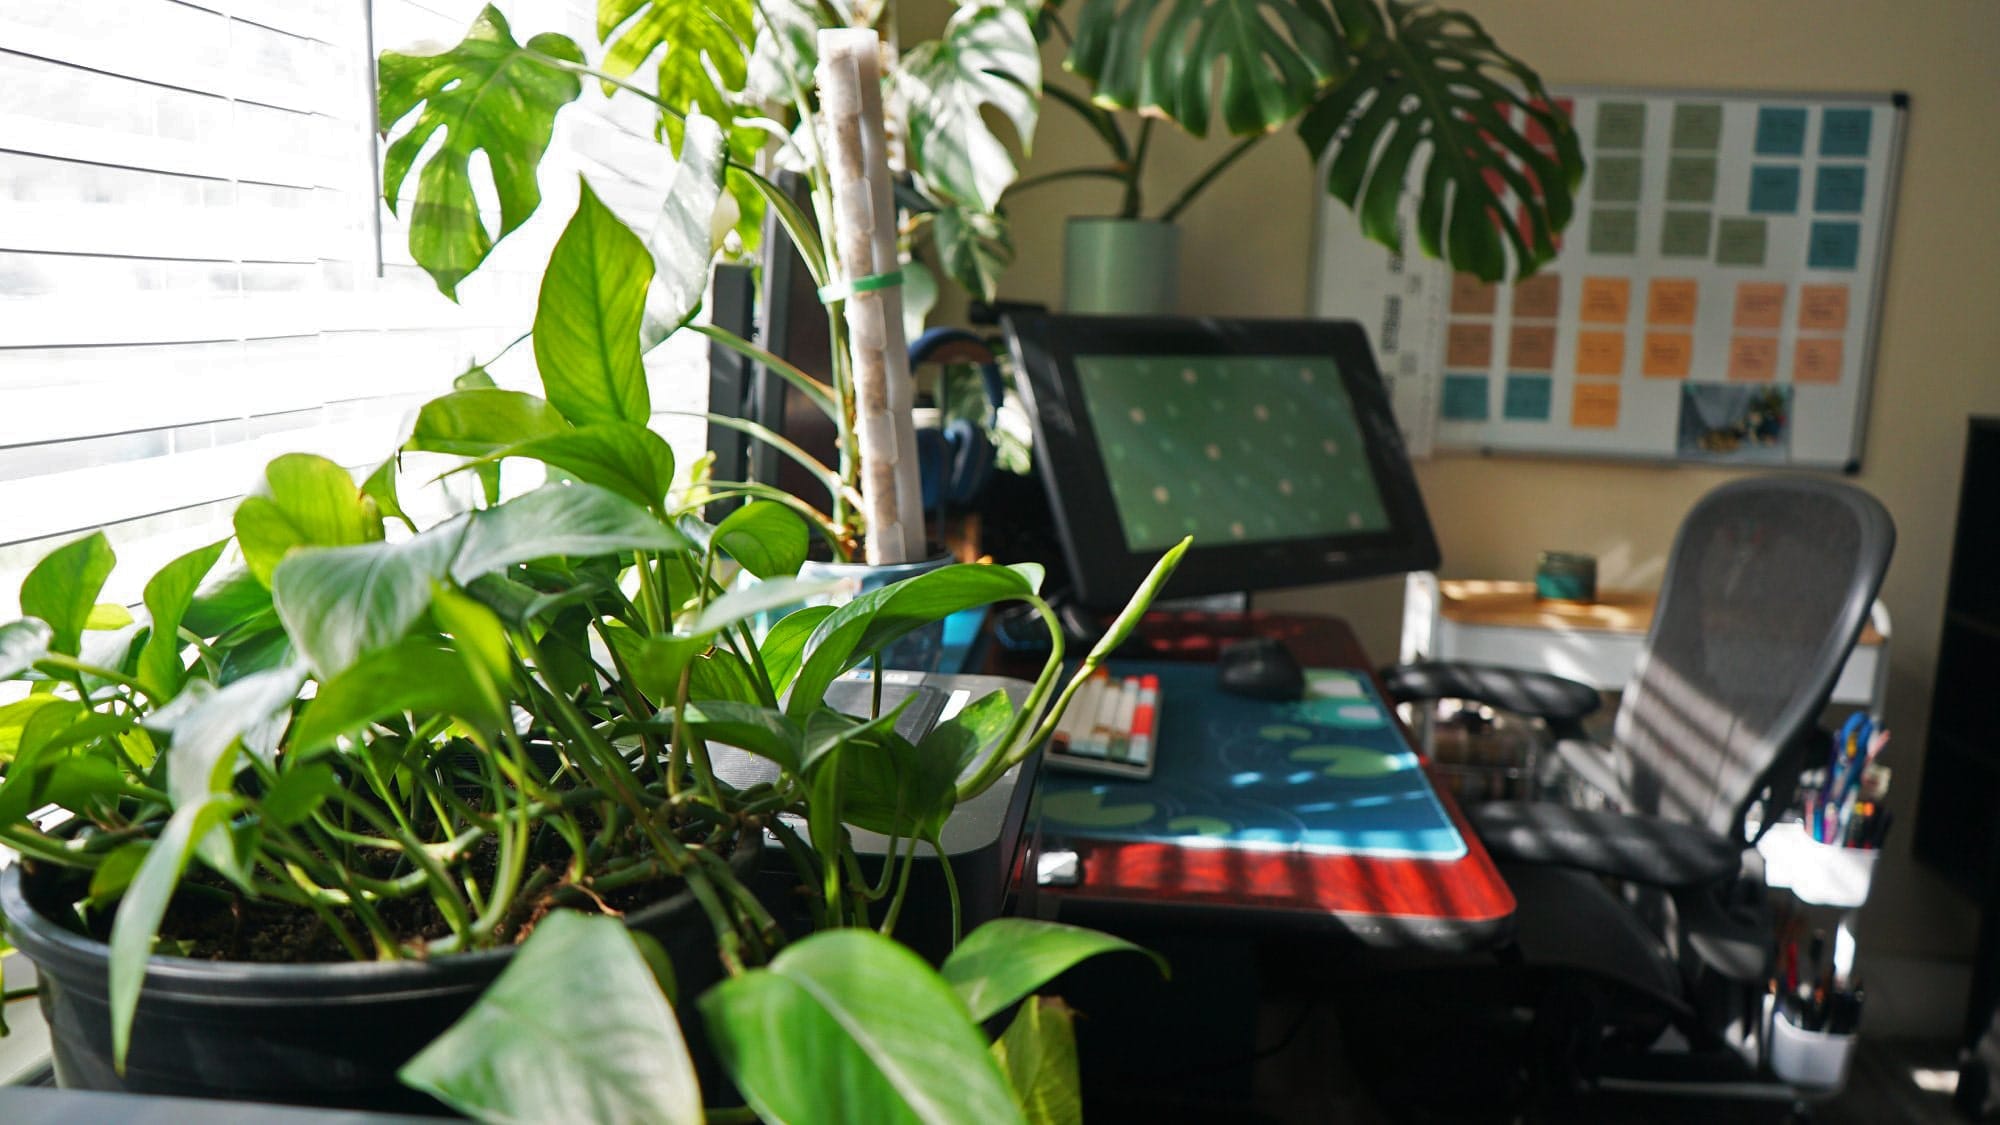 A home office bathed in sunlight, showcasing a large desktop monitor, graphic tablet, ergonomic chair, and lush green plants